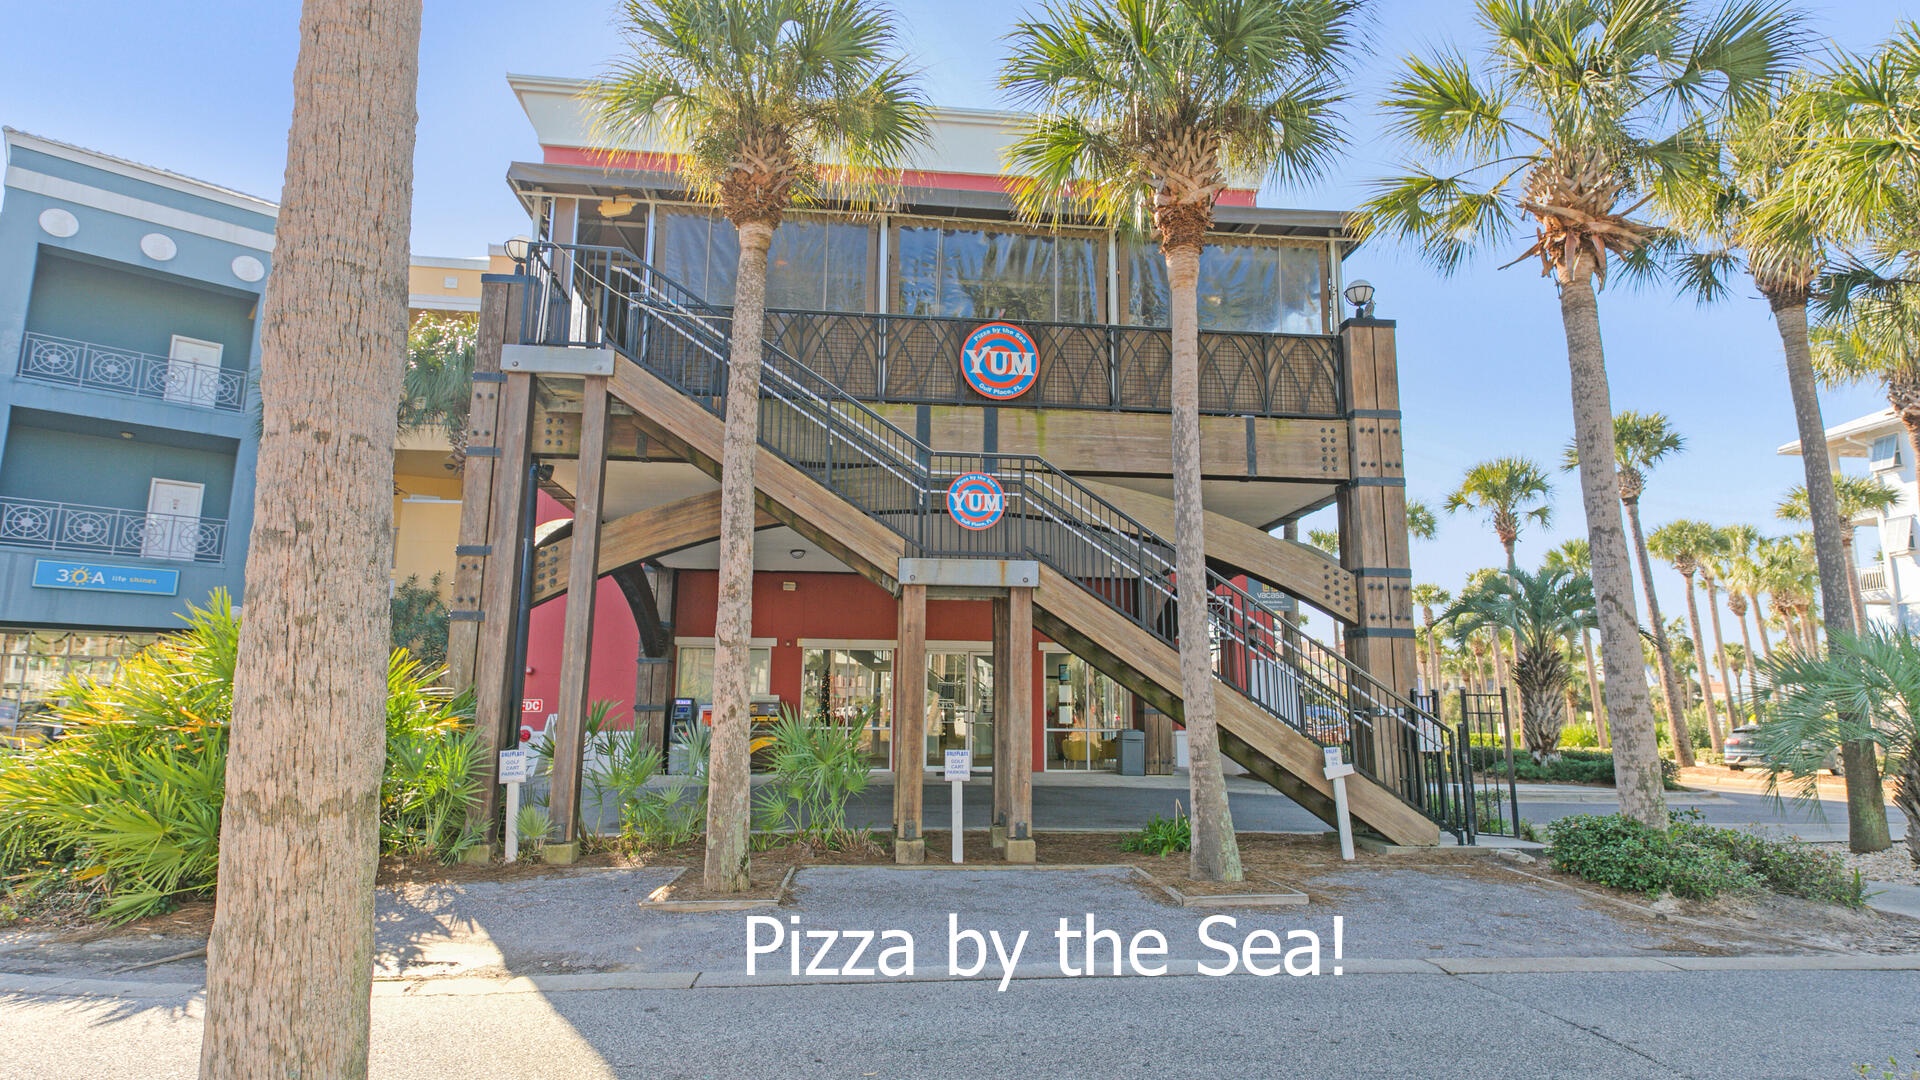 Dining, shopping and fun at nearby Gulf Place!